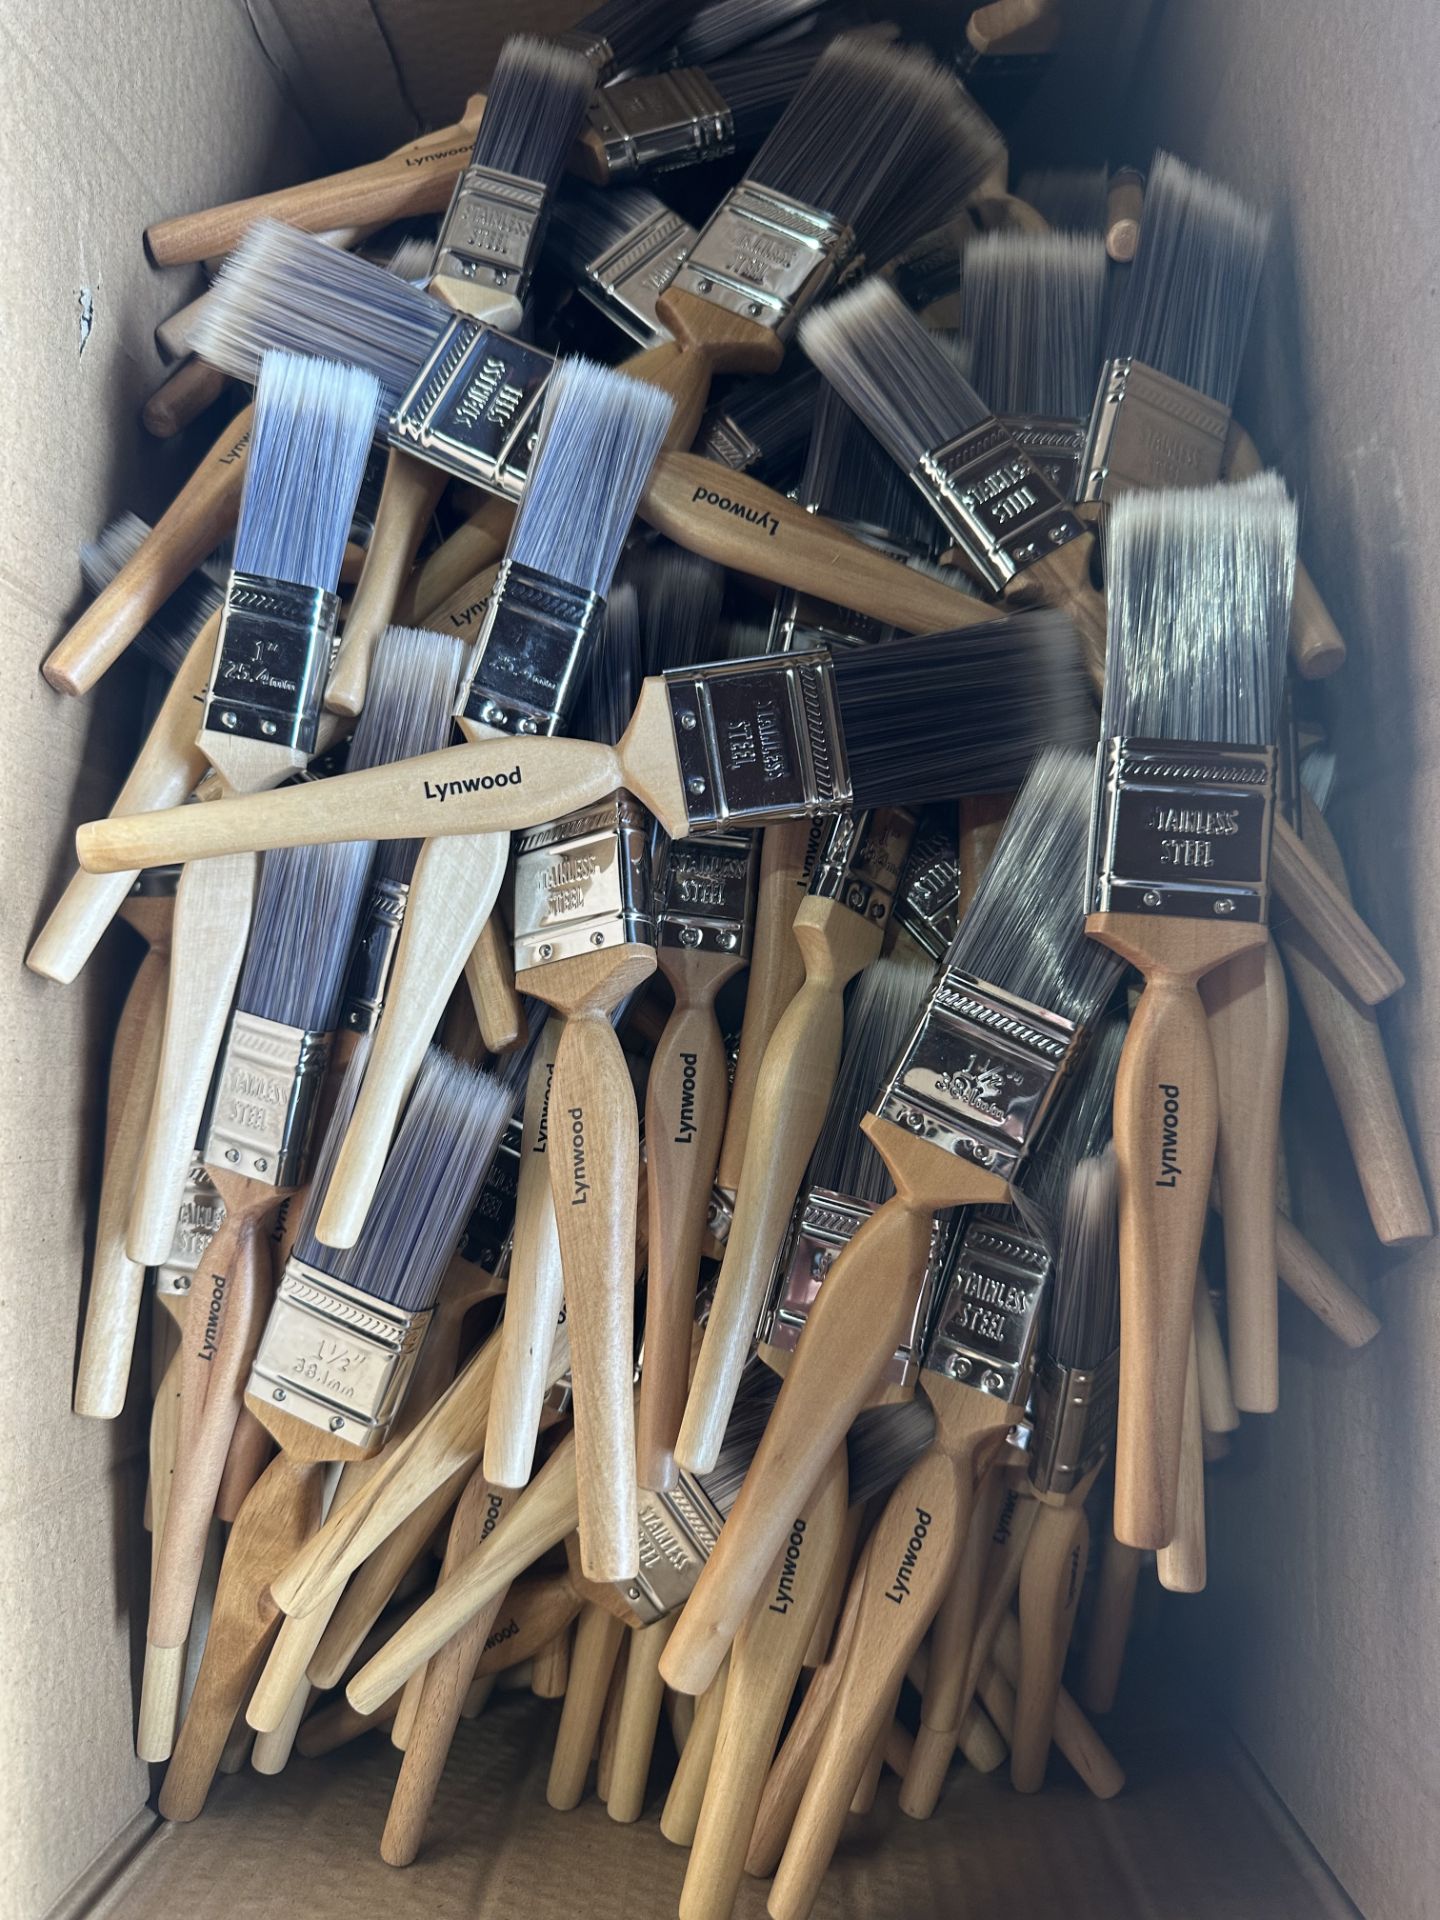 320 WOODEN HANDLE SILVER BRISTLE PAINT BRUSHES